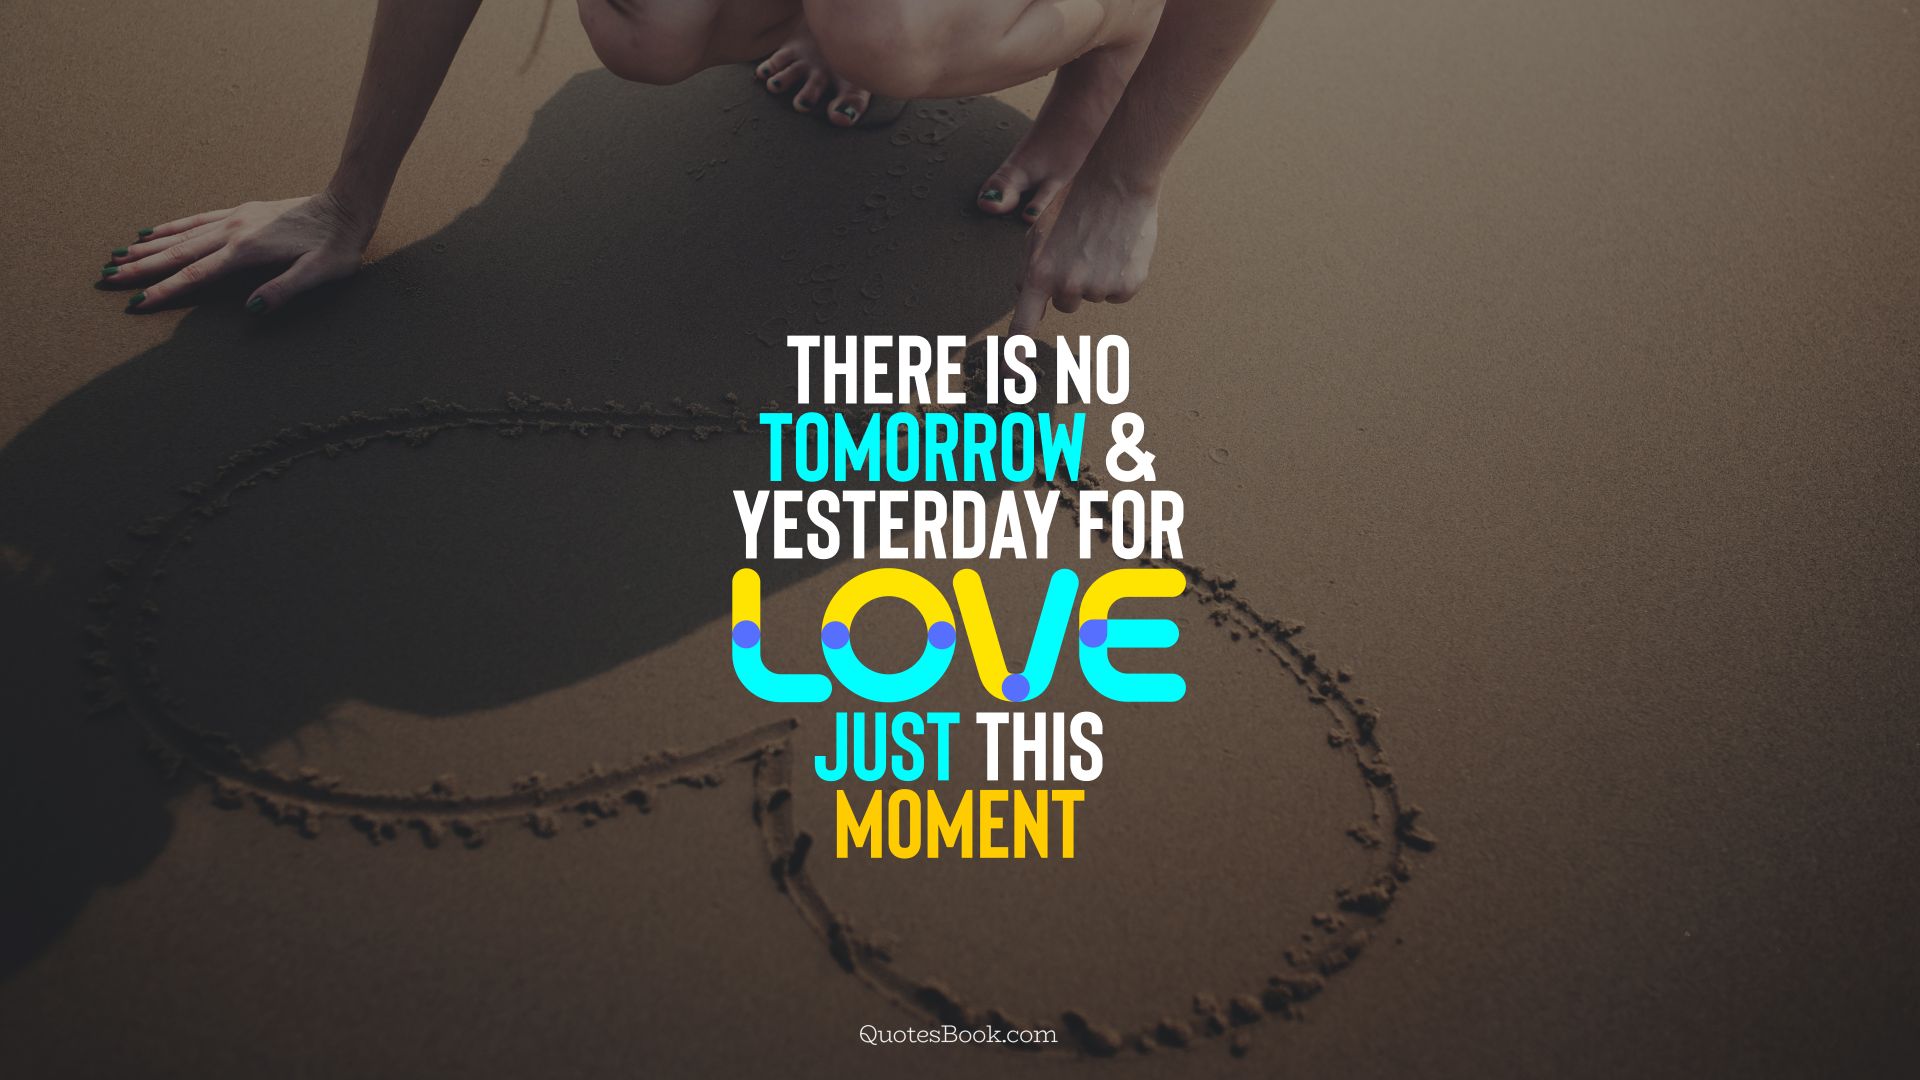 There is no tomorrow and yesterday for love, just this moment. - Quote by QuotesBook